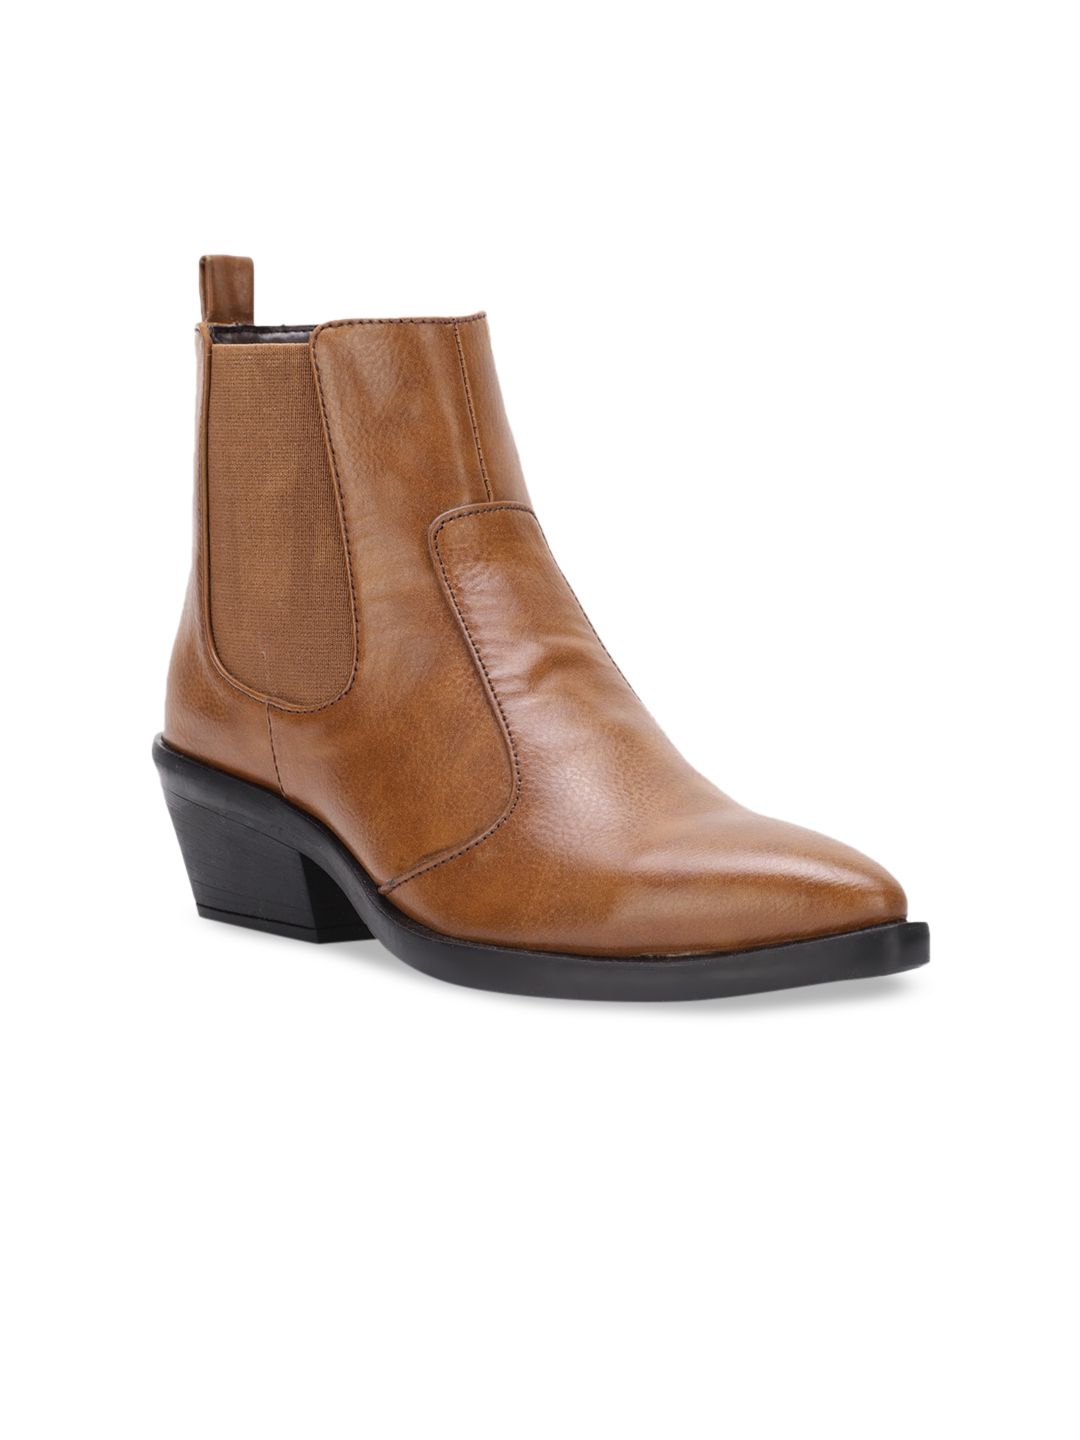 Bruno Manetti Women Tan Brown Solid Heeled Boots Price in India